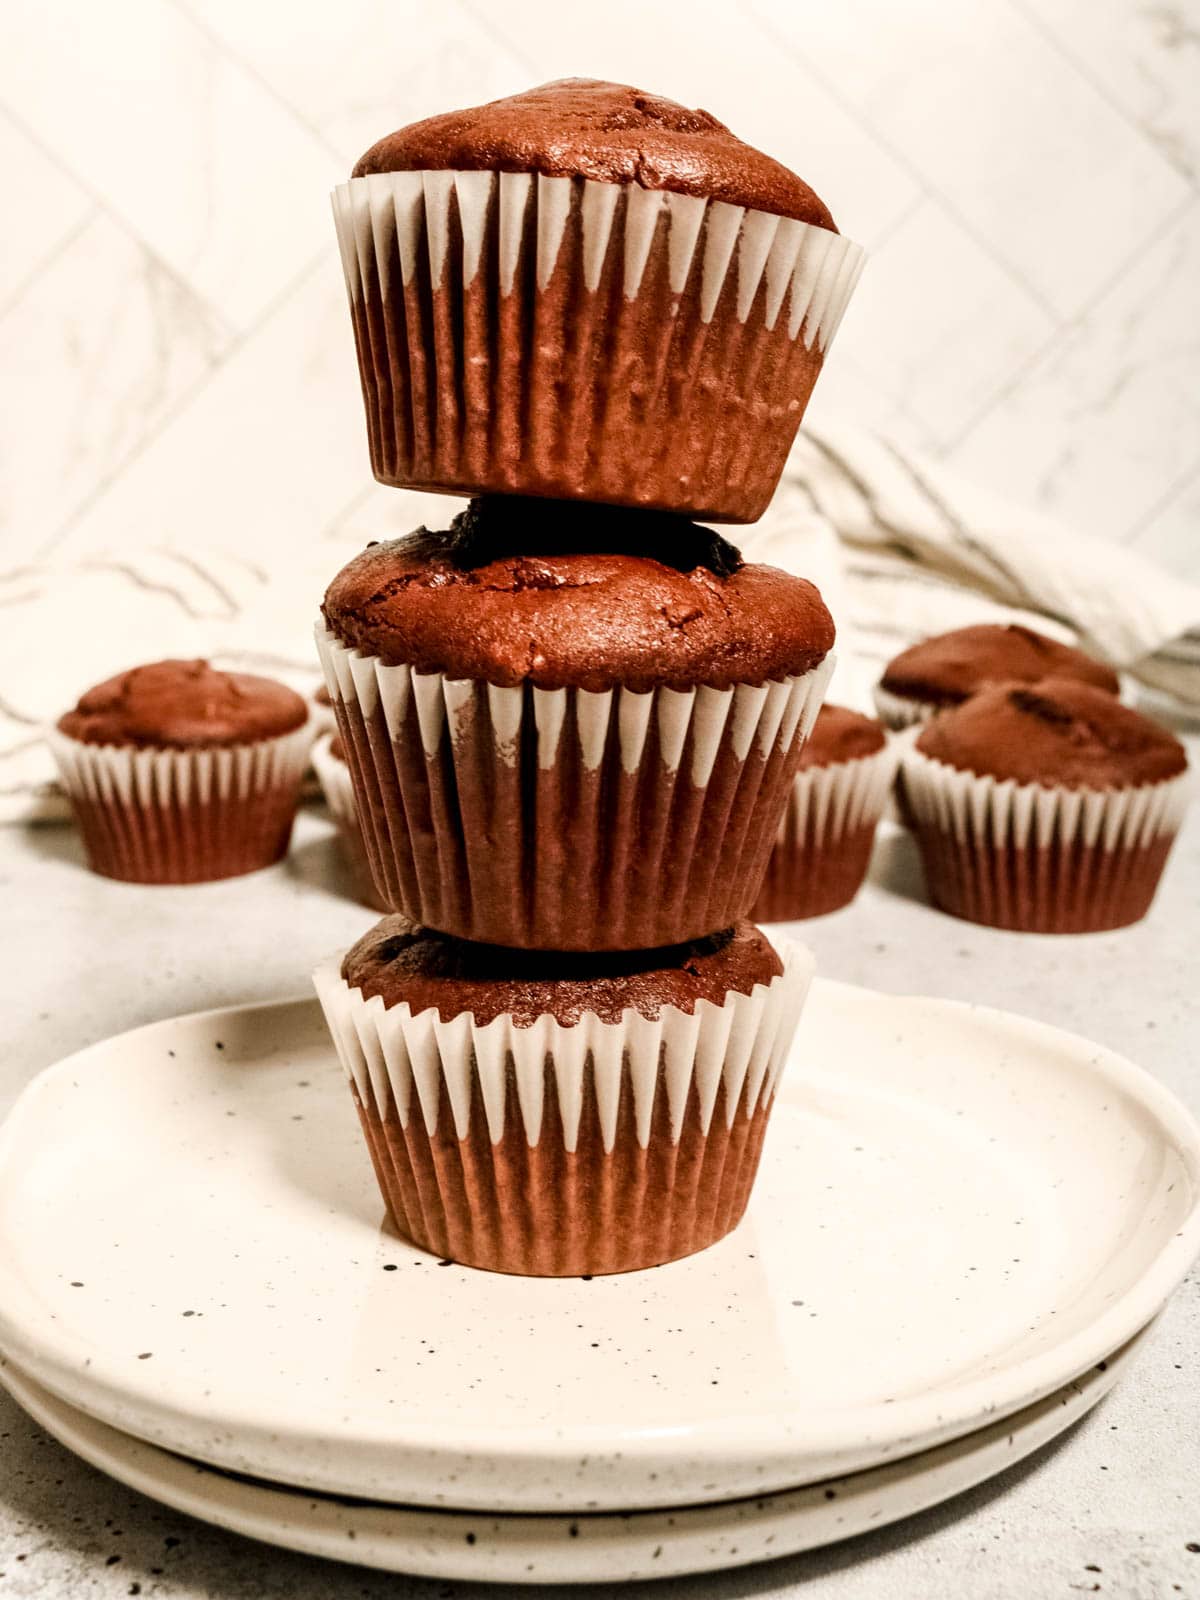 Stack of three sourdough chocolate muffins on a plate.